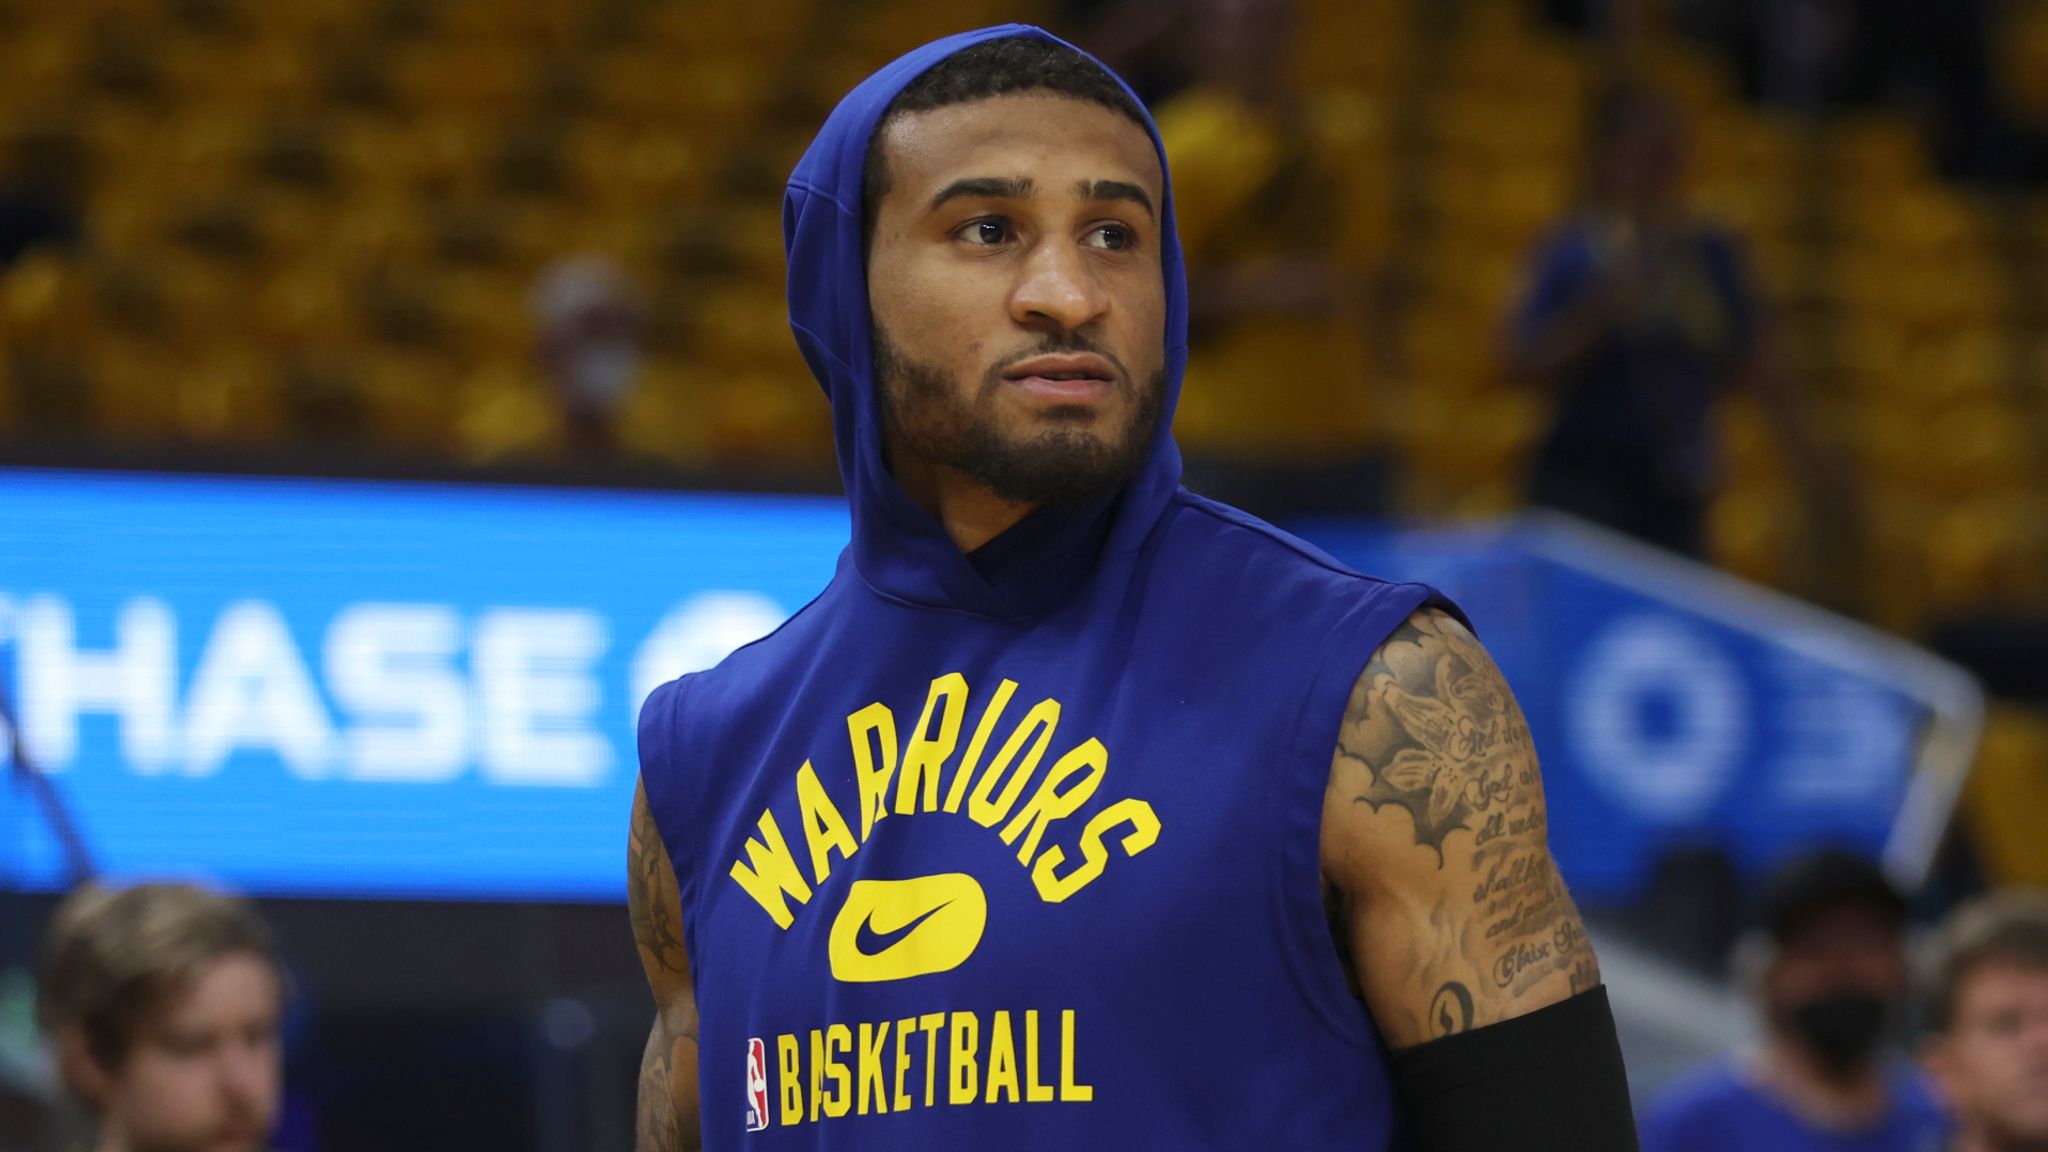 Gary Payton II 'ready to go' for Warriors ahead of Game 1